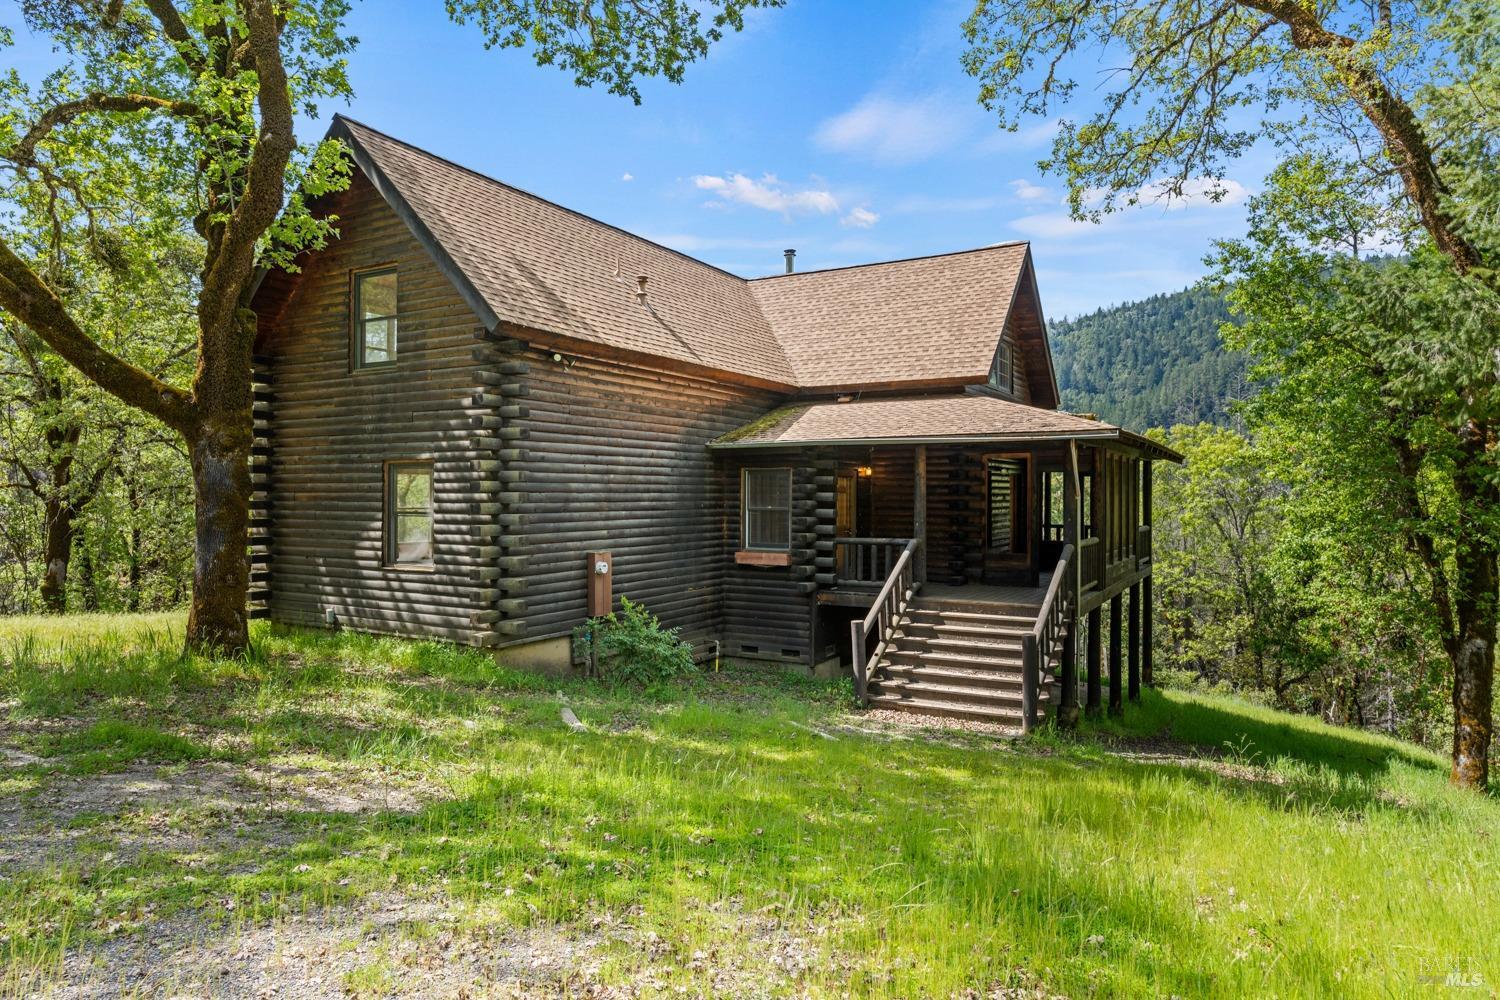 Photo of 31100 Shimmins Ridge Rd in Willits, CA